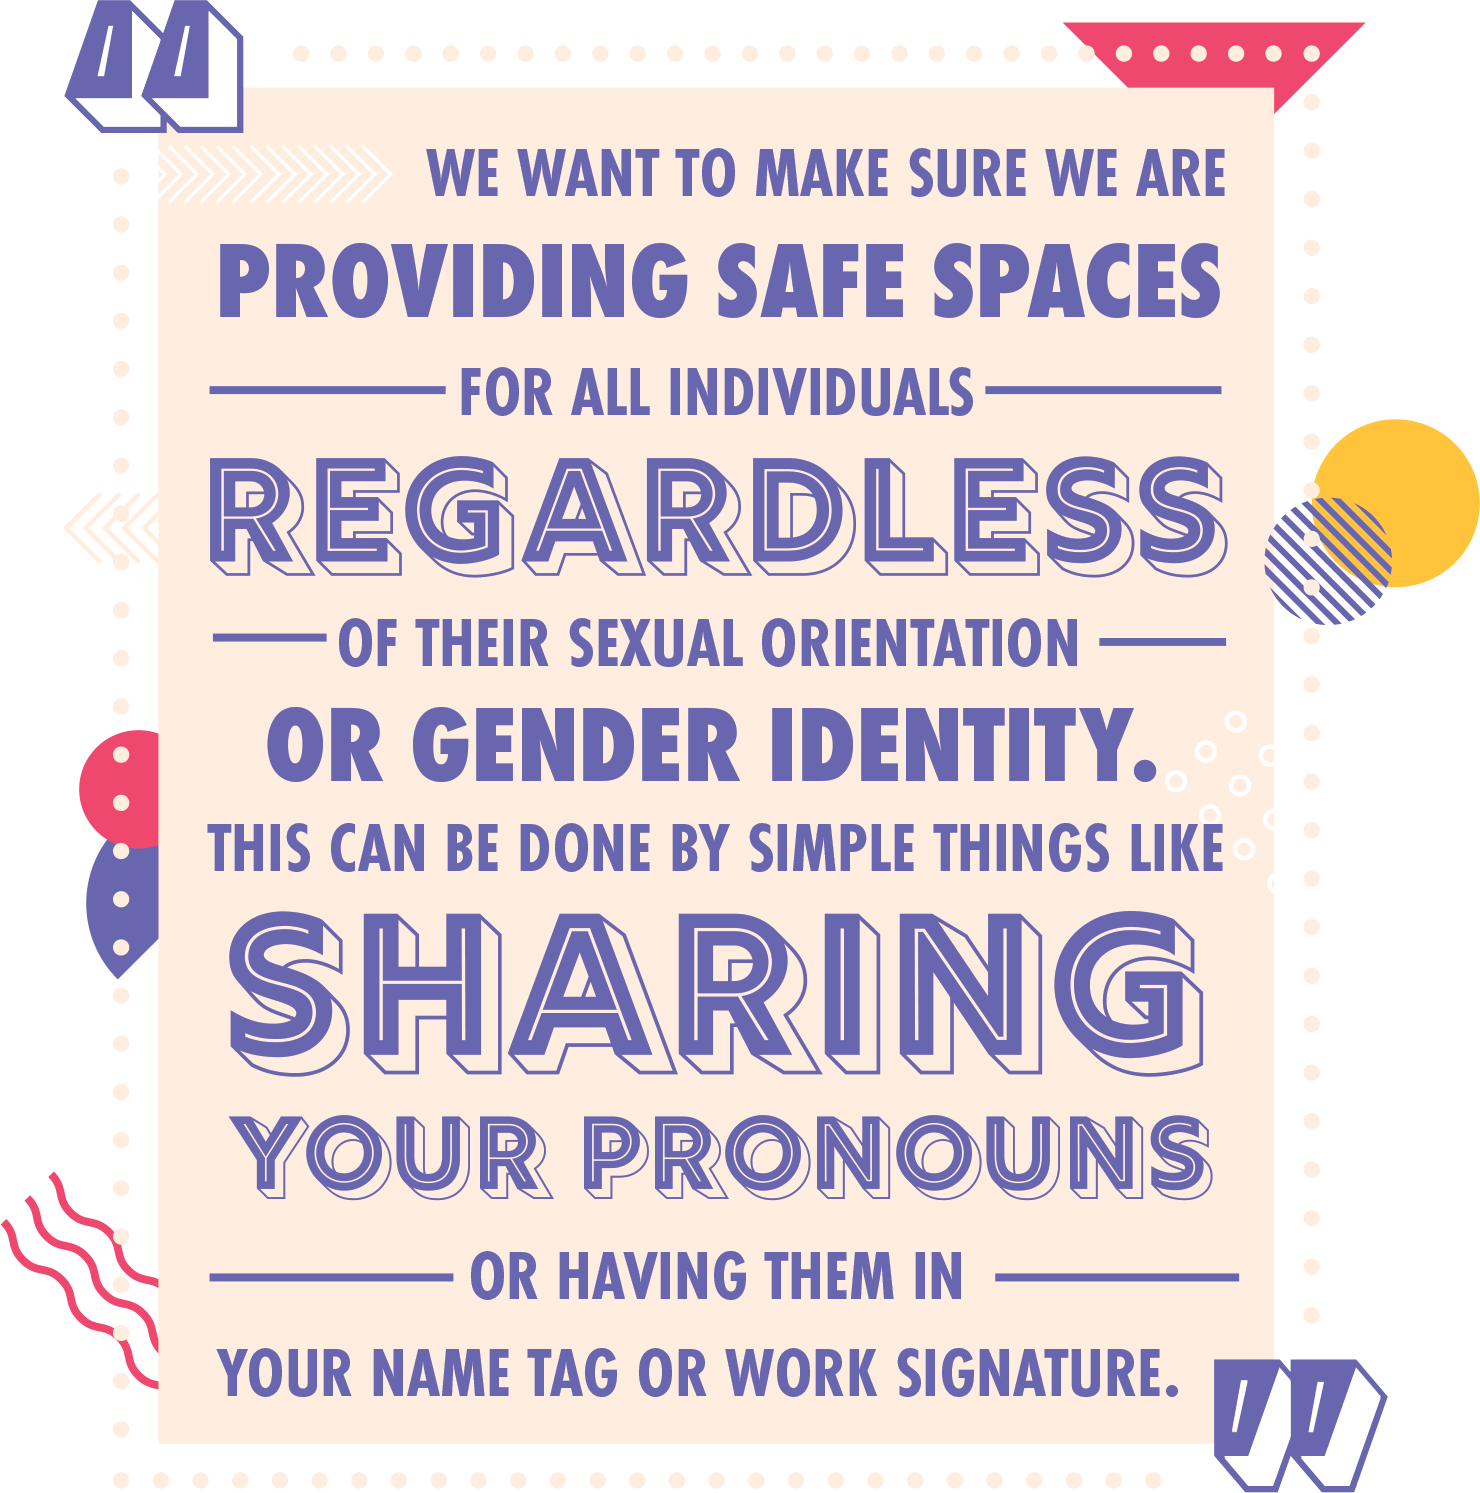 We want to make sure we are providing safe spaces for all individuals regardless of their sexual orientation or gender identity. This can be done by simple things like sharing your pronouns or having them in your name tag or work signature.